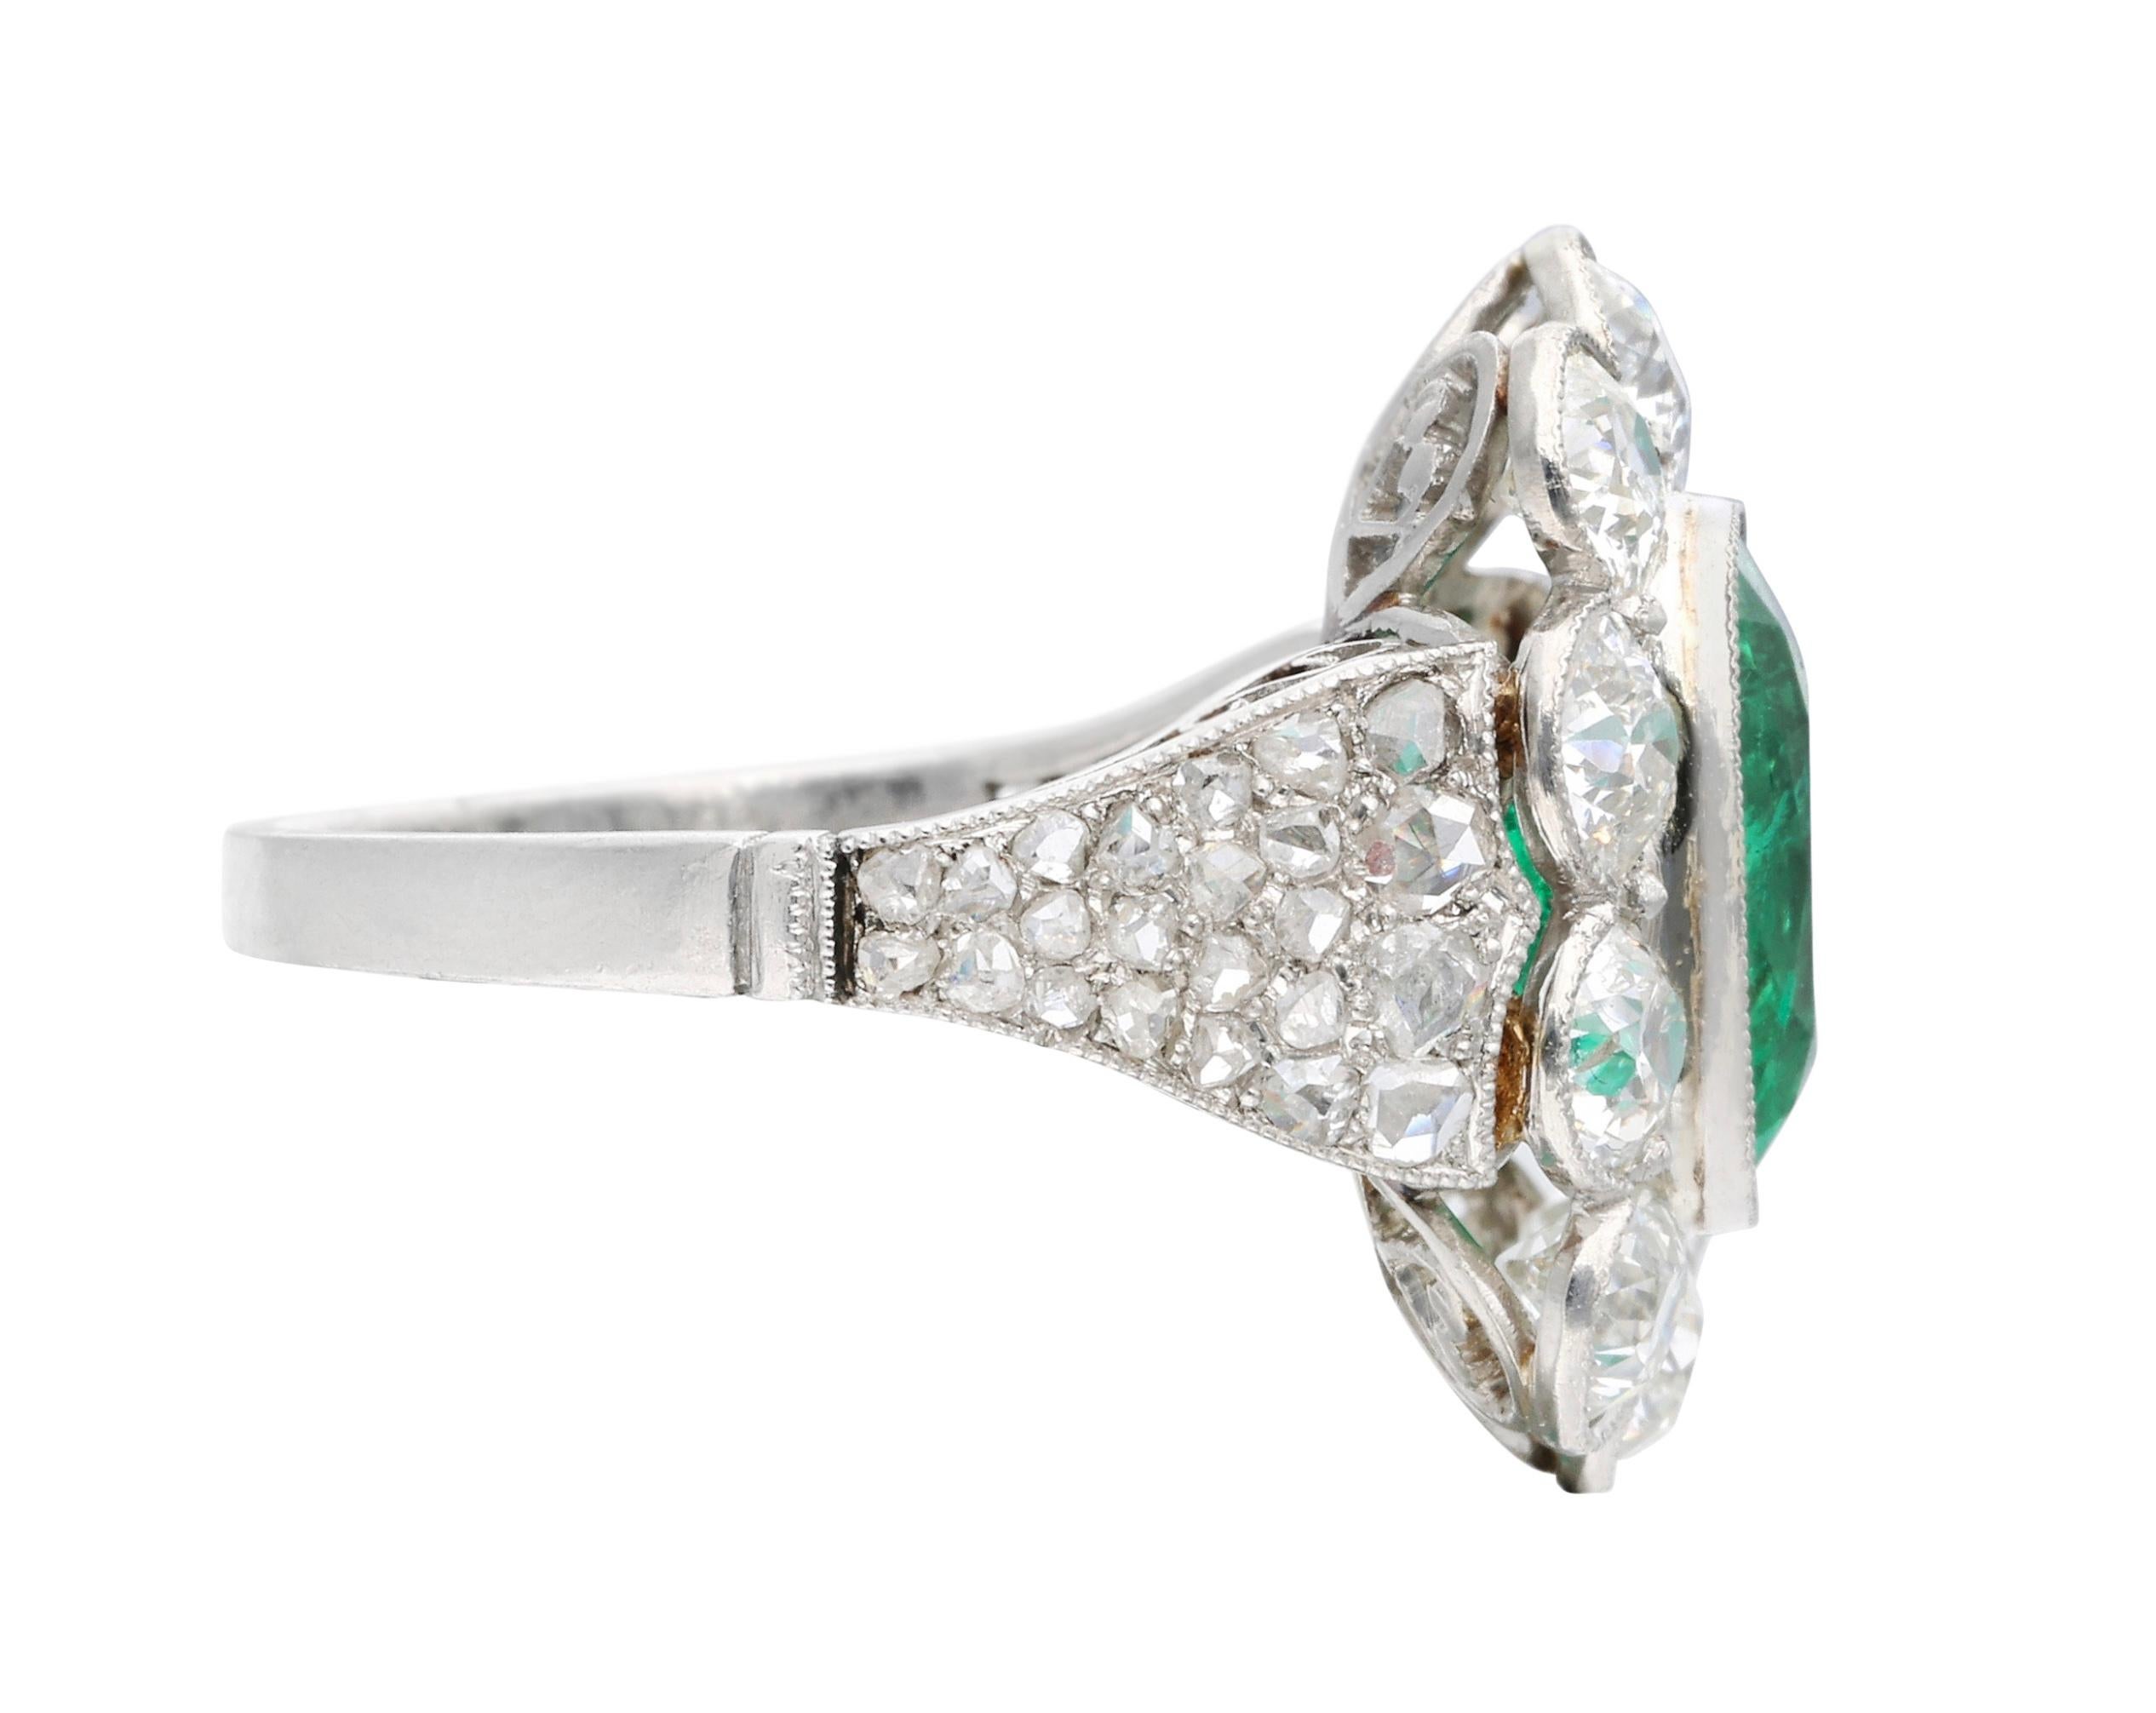 This ring features a cushion-shaped emerald, surrounded by 10 round old European cut diamonds with additional faceted diamonds on shanks.

- Emerald weighs approximately 2.60 carats
- Old European cut diamonds weighing a total of approximately 3.50